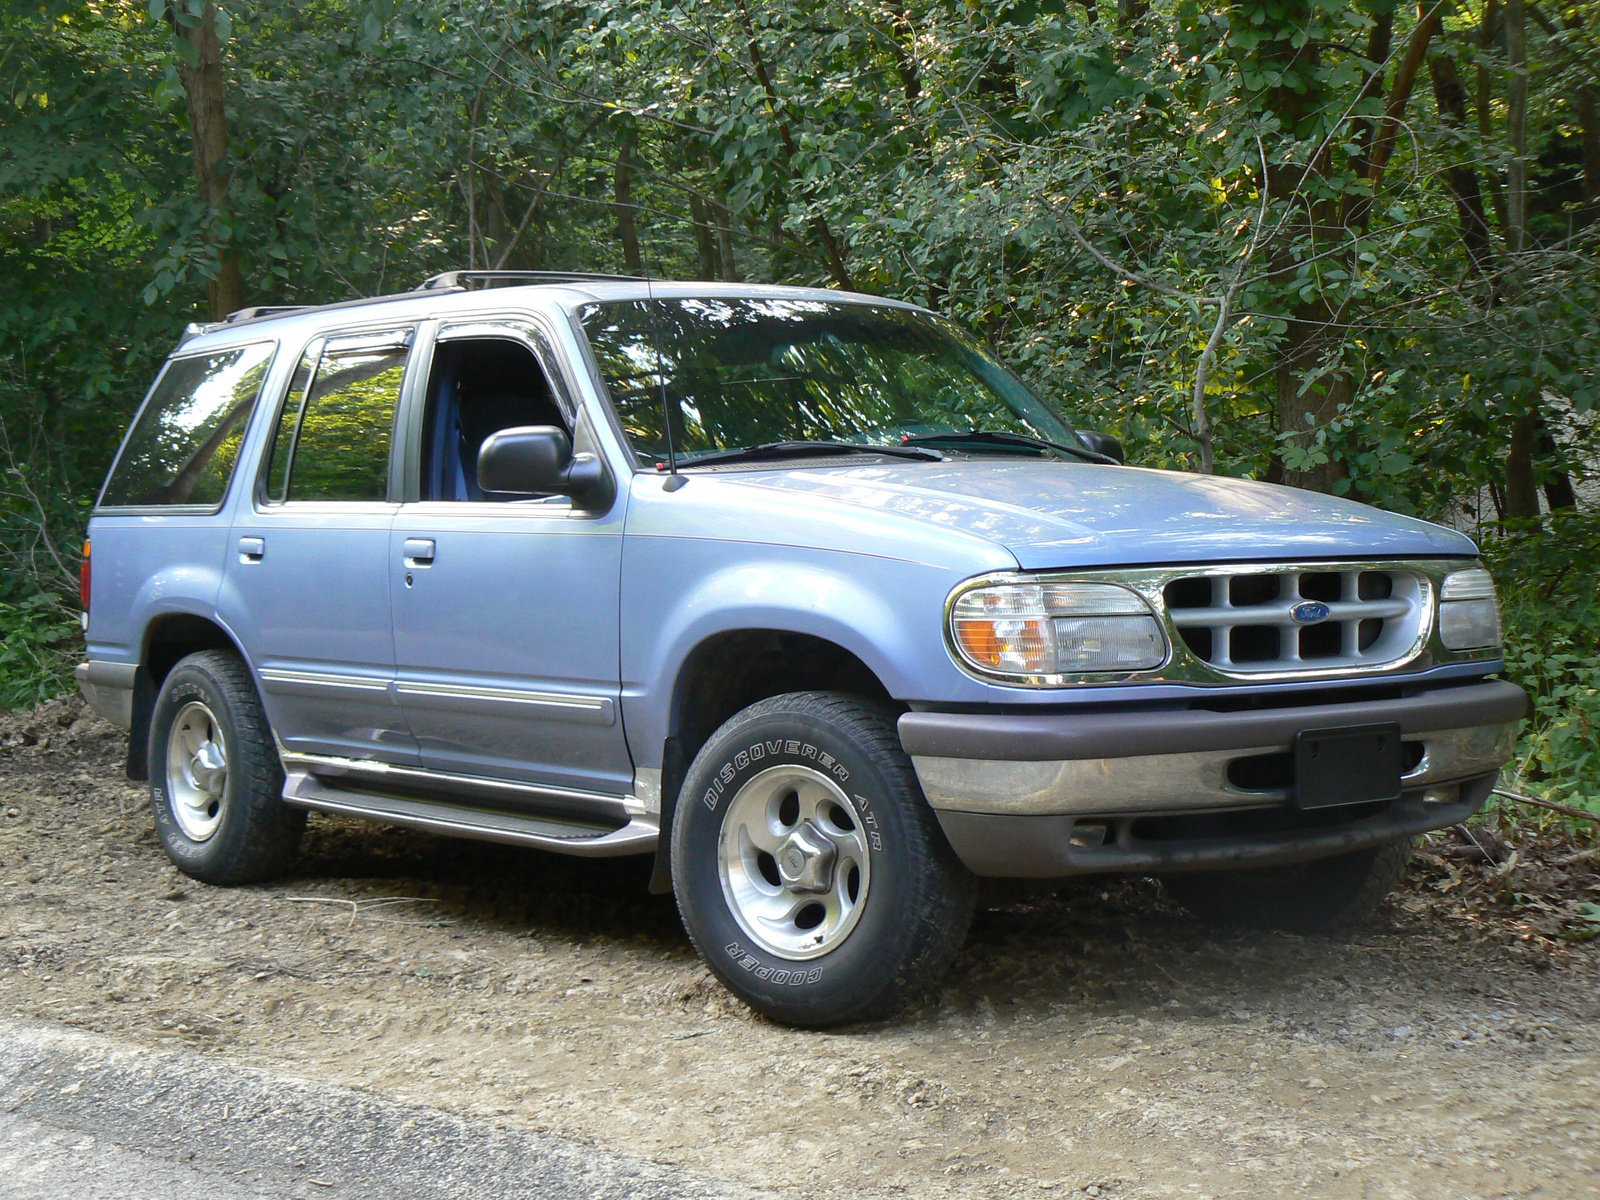 Ford explorer 1997 tire size #9